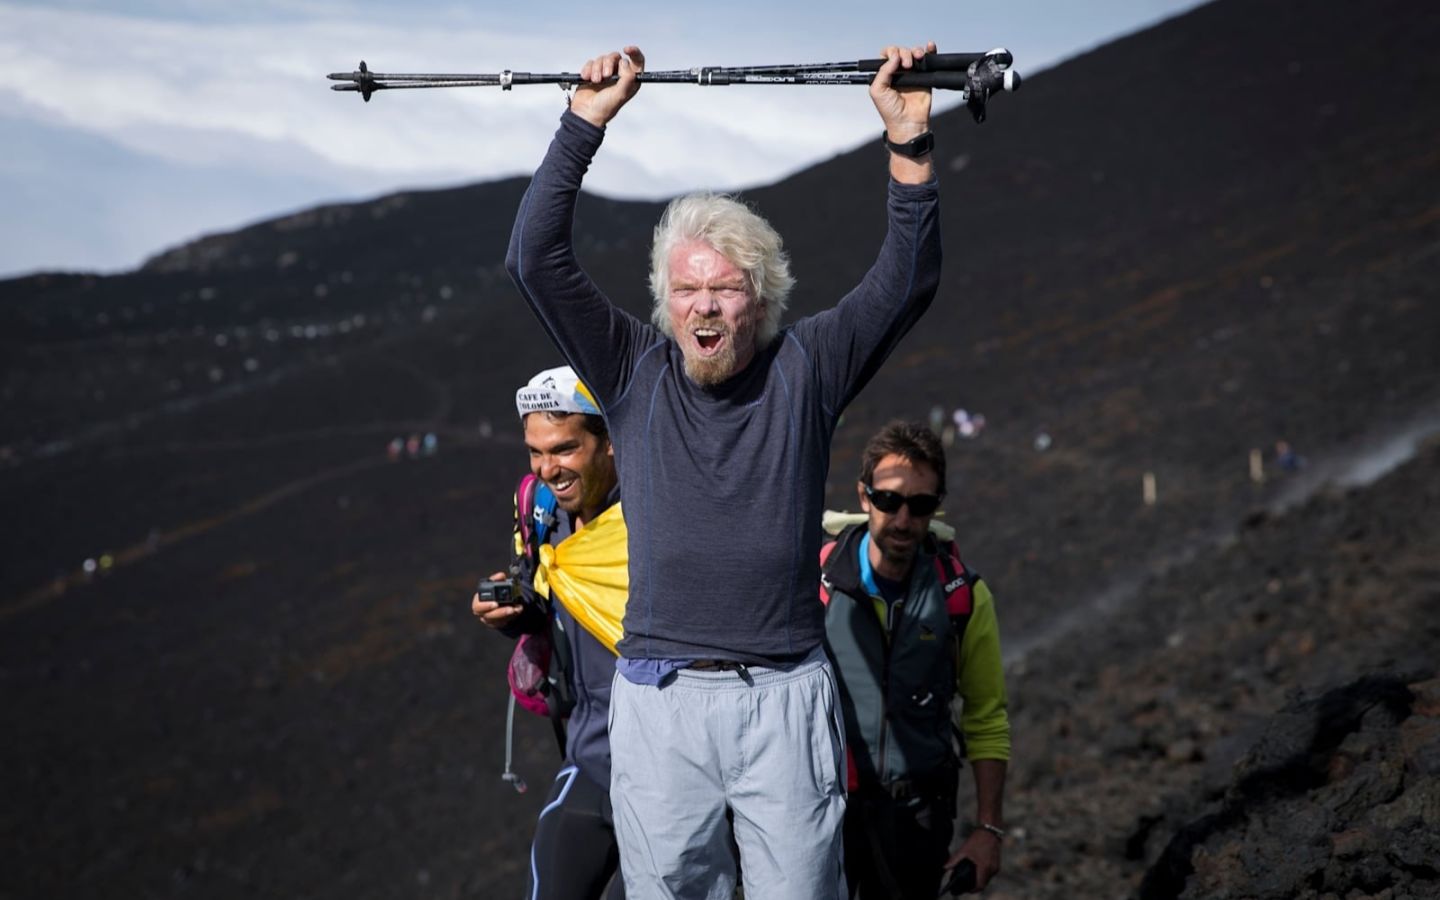 Richard Branson celebrating getting to the top of a mountain